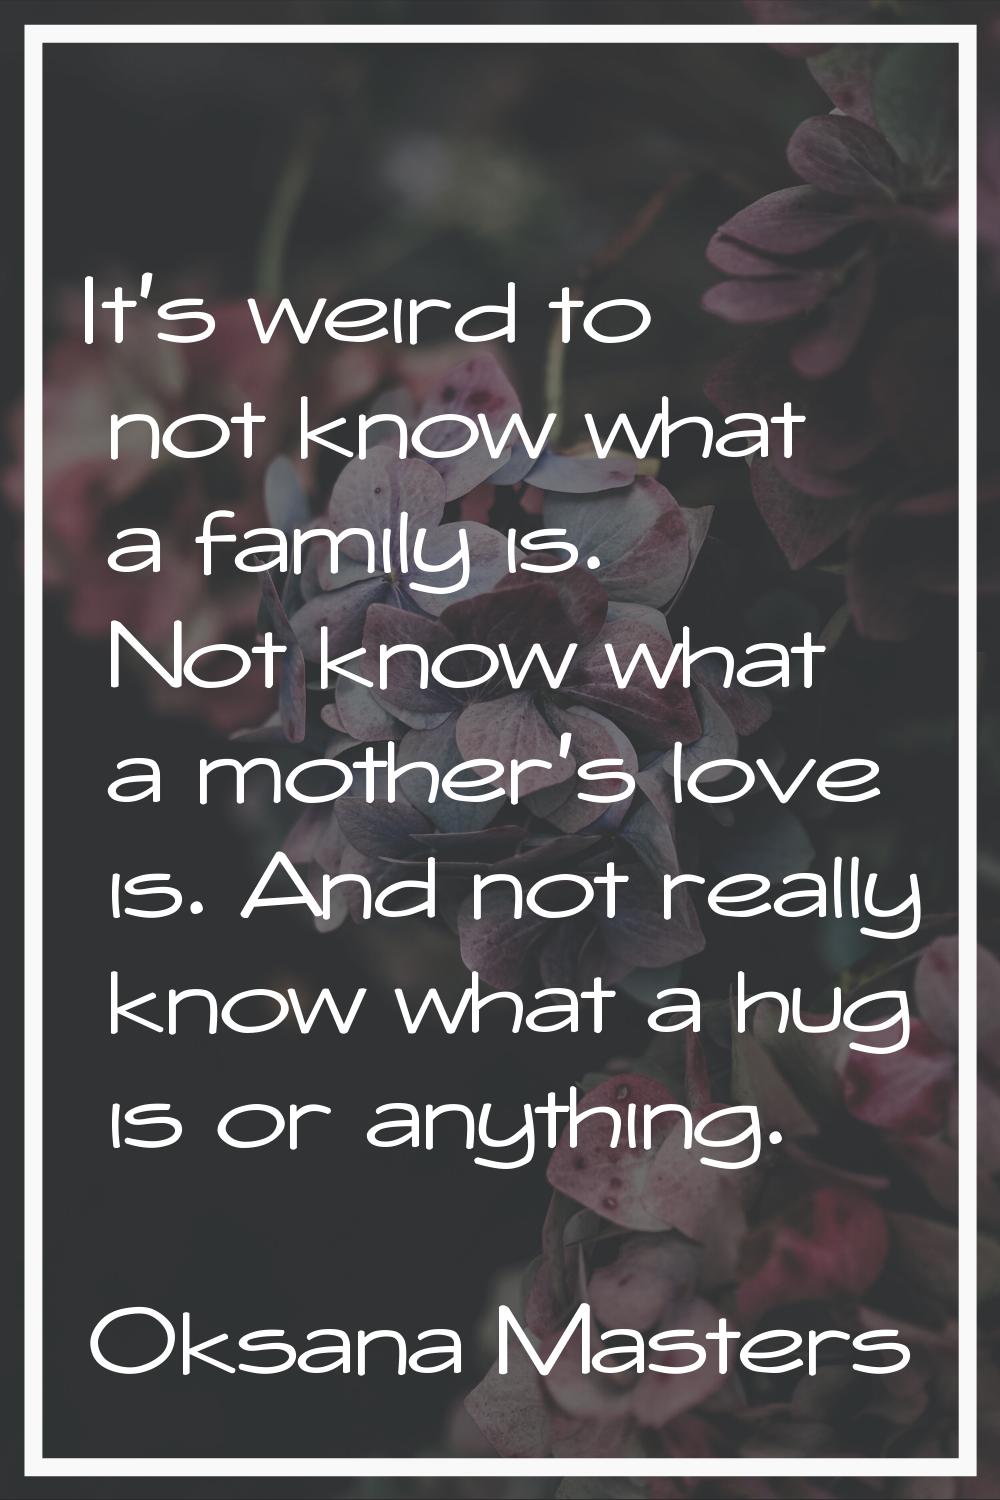 It's weird to not know what a family is. Not know what a mother's love is. And not really know what